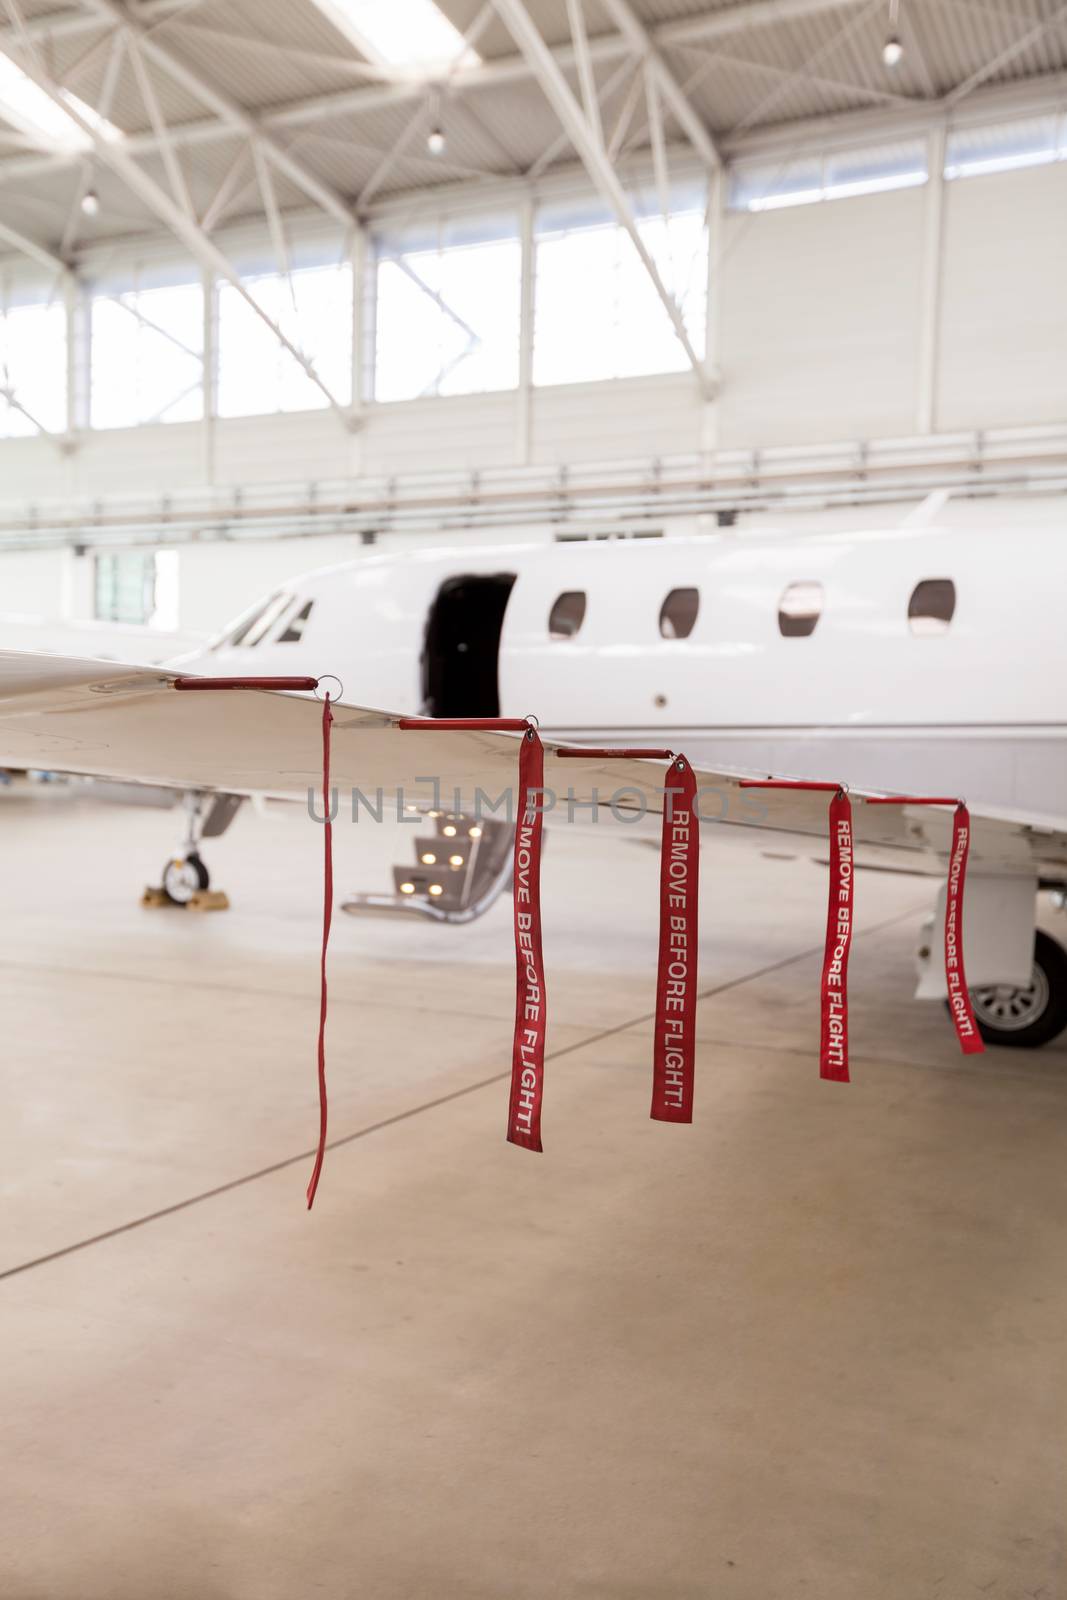 Airplane in Hangar with remove before flight Labels in red by juniart